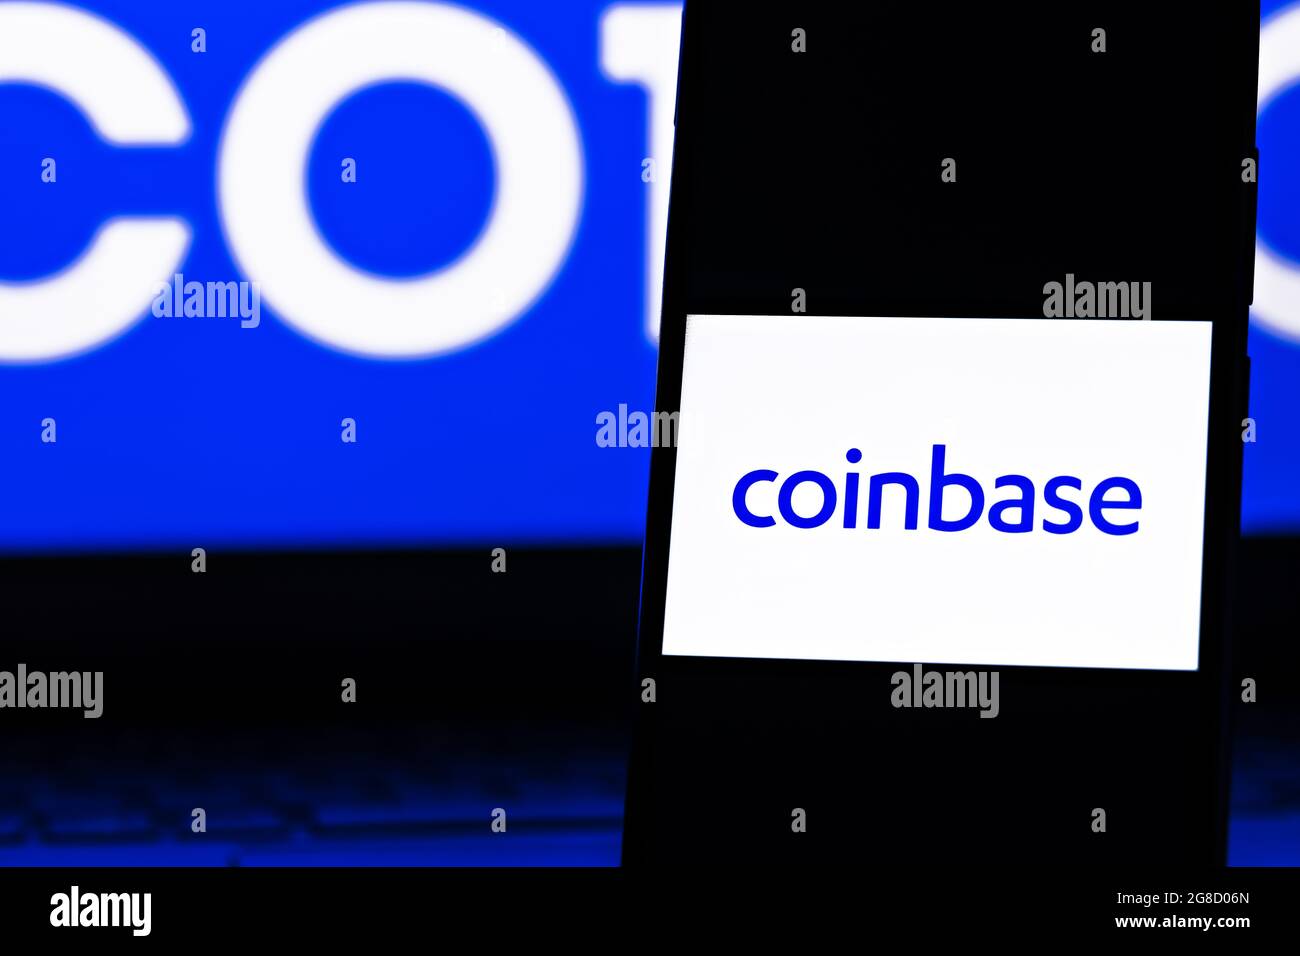 Editorial photo on Coinbase theme.  Illustrative photo for news about Coinbase - a company that operates a cryptocurrency exchange platform Stock Photo